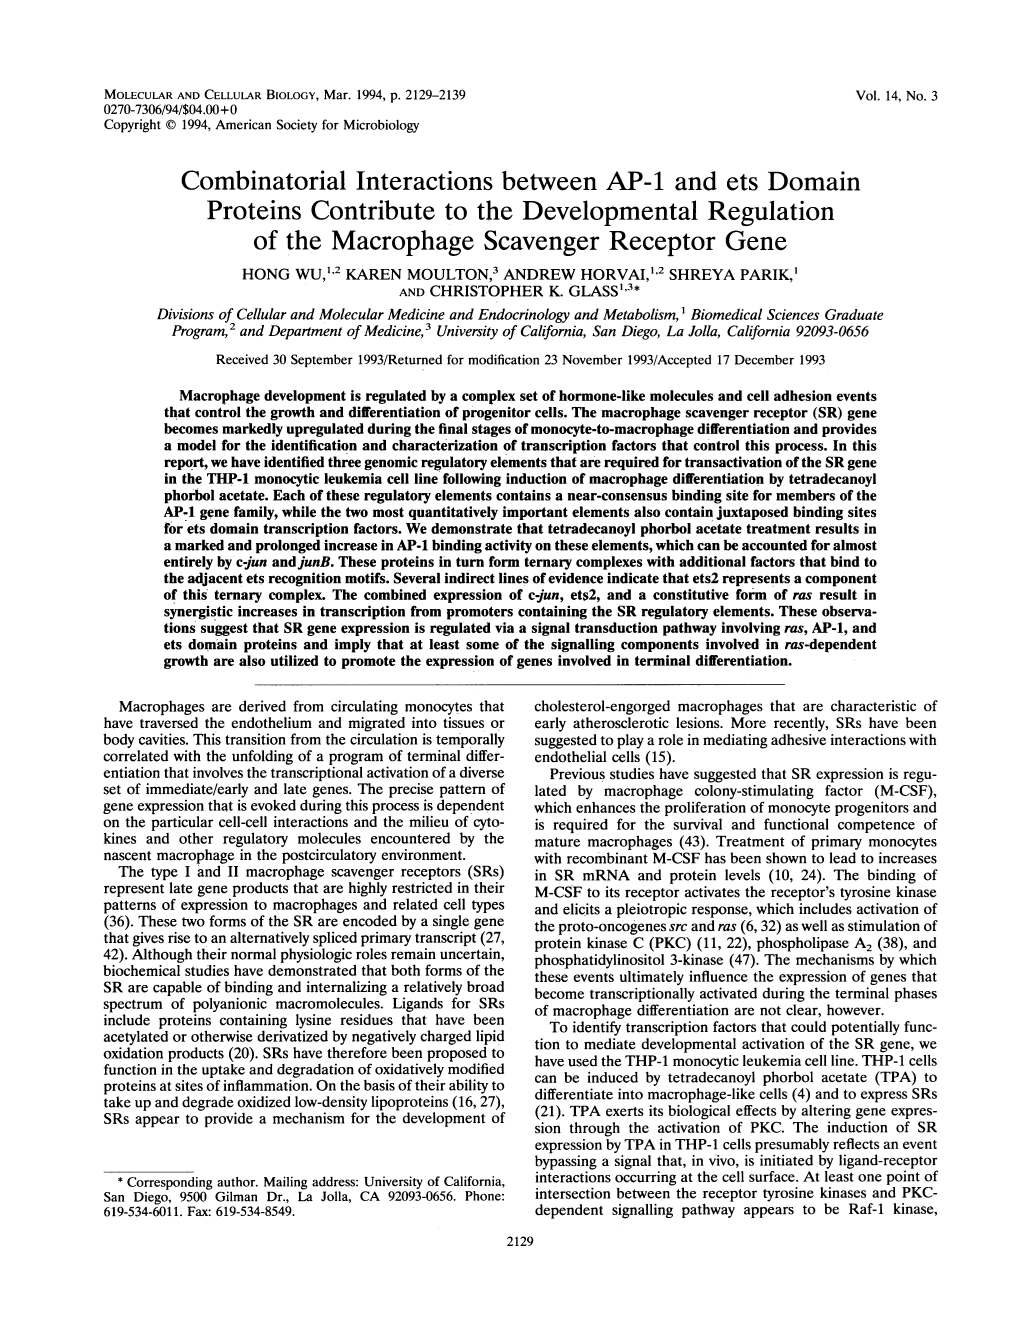 Combinatorial Interactions Between AP-1 and Ets Domain Proteins